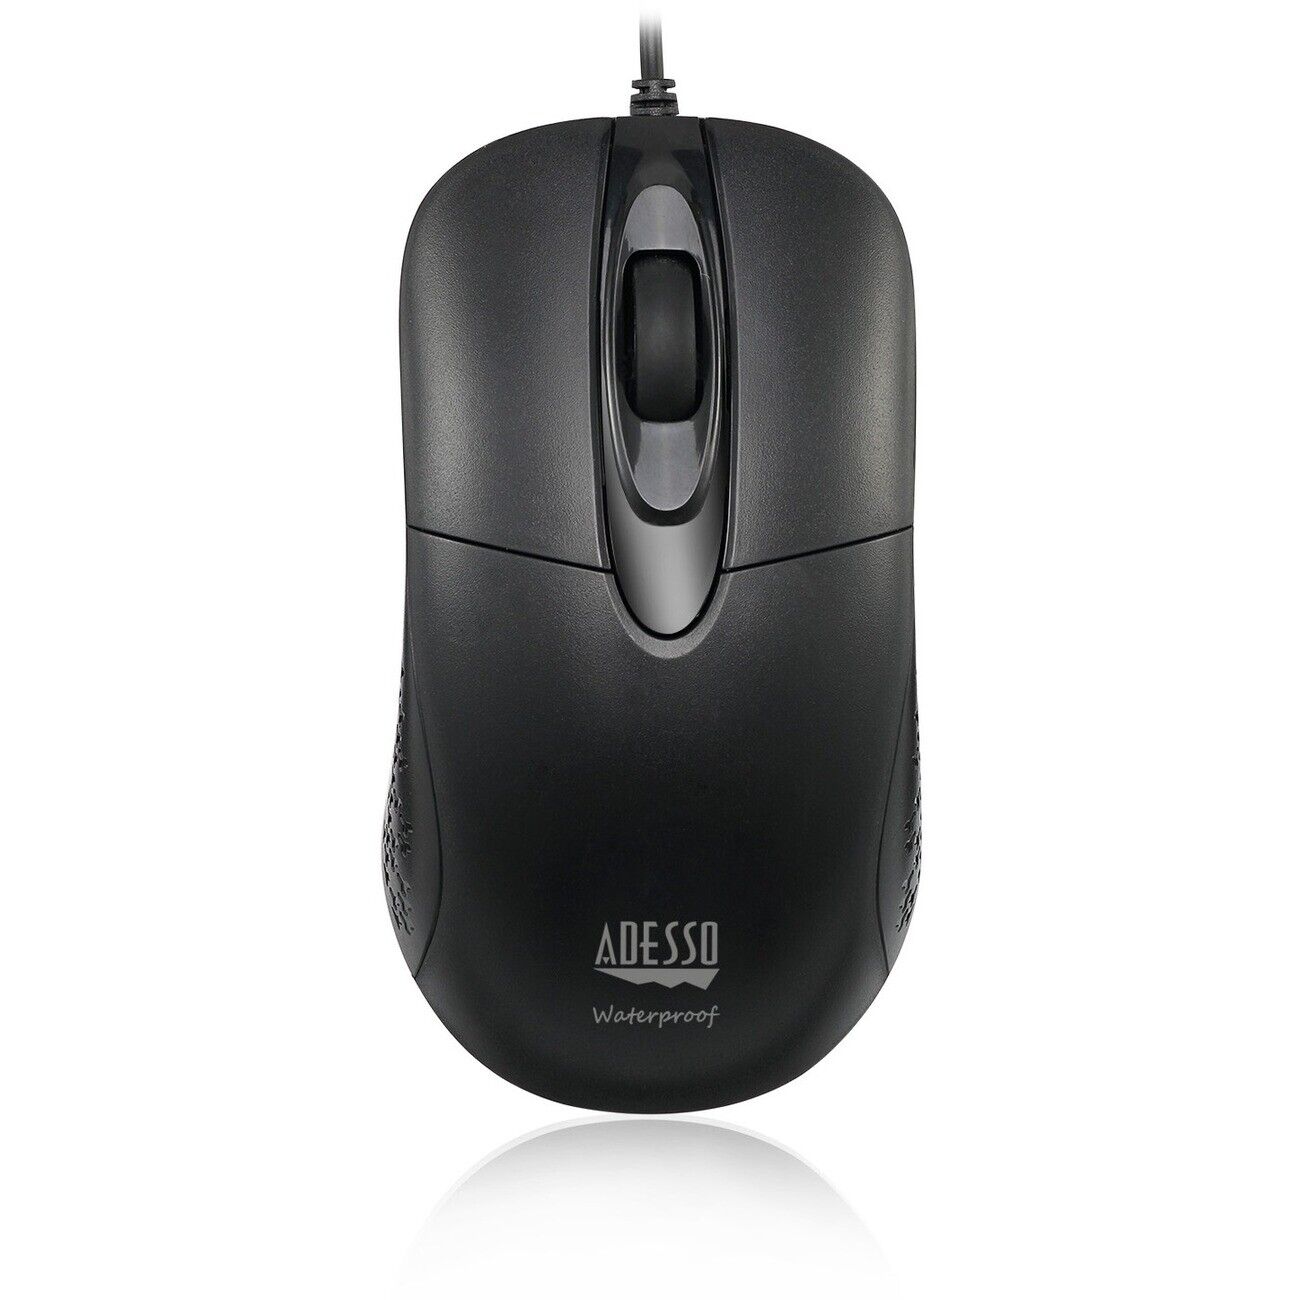 Adesso iMouse W4 - Waterproof Antimicrobial Optical Mouse (IMOUSE W4)